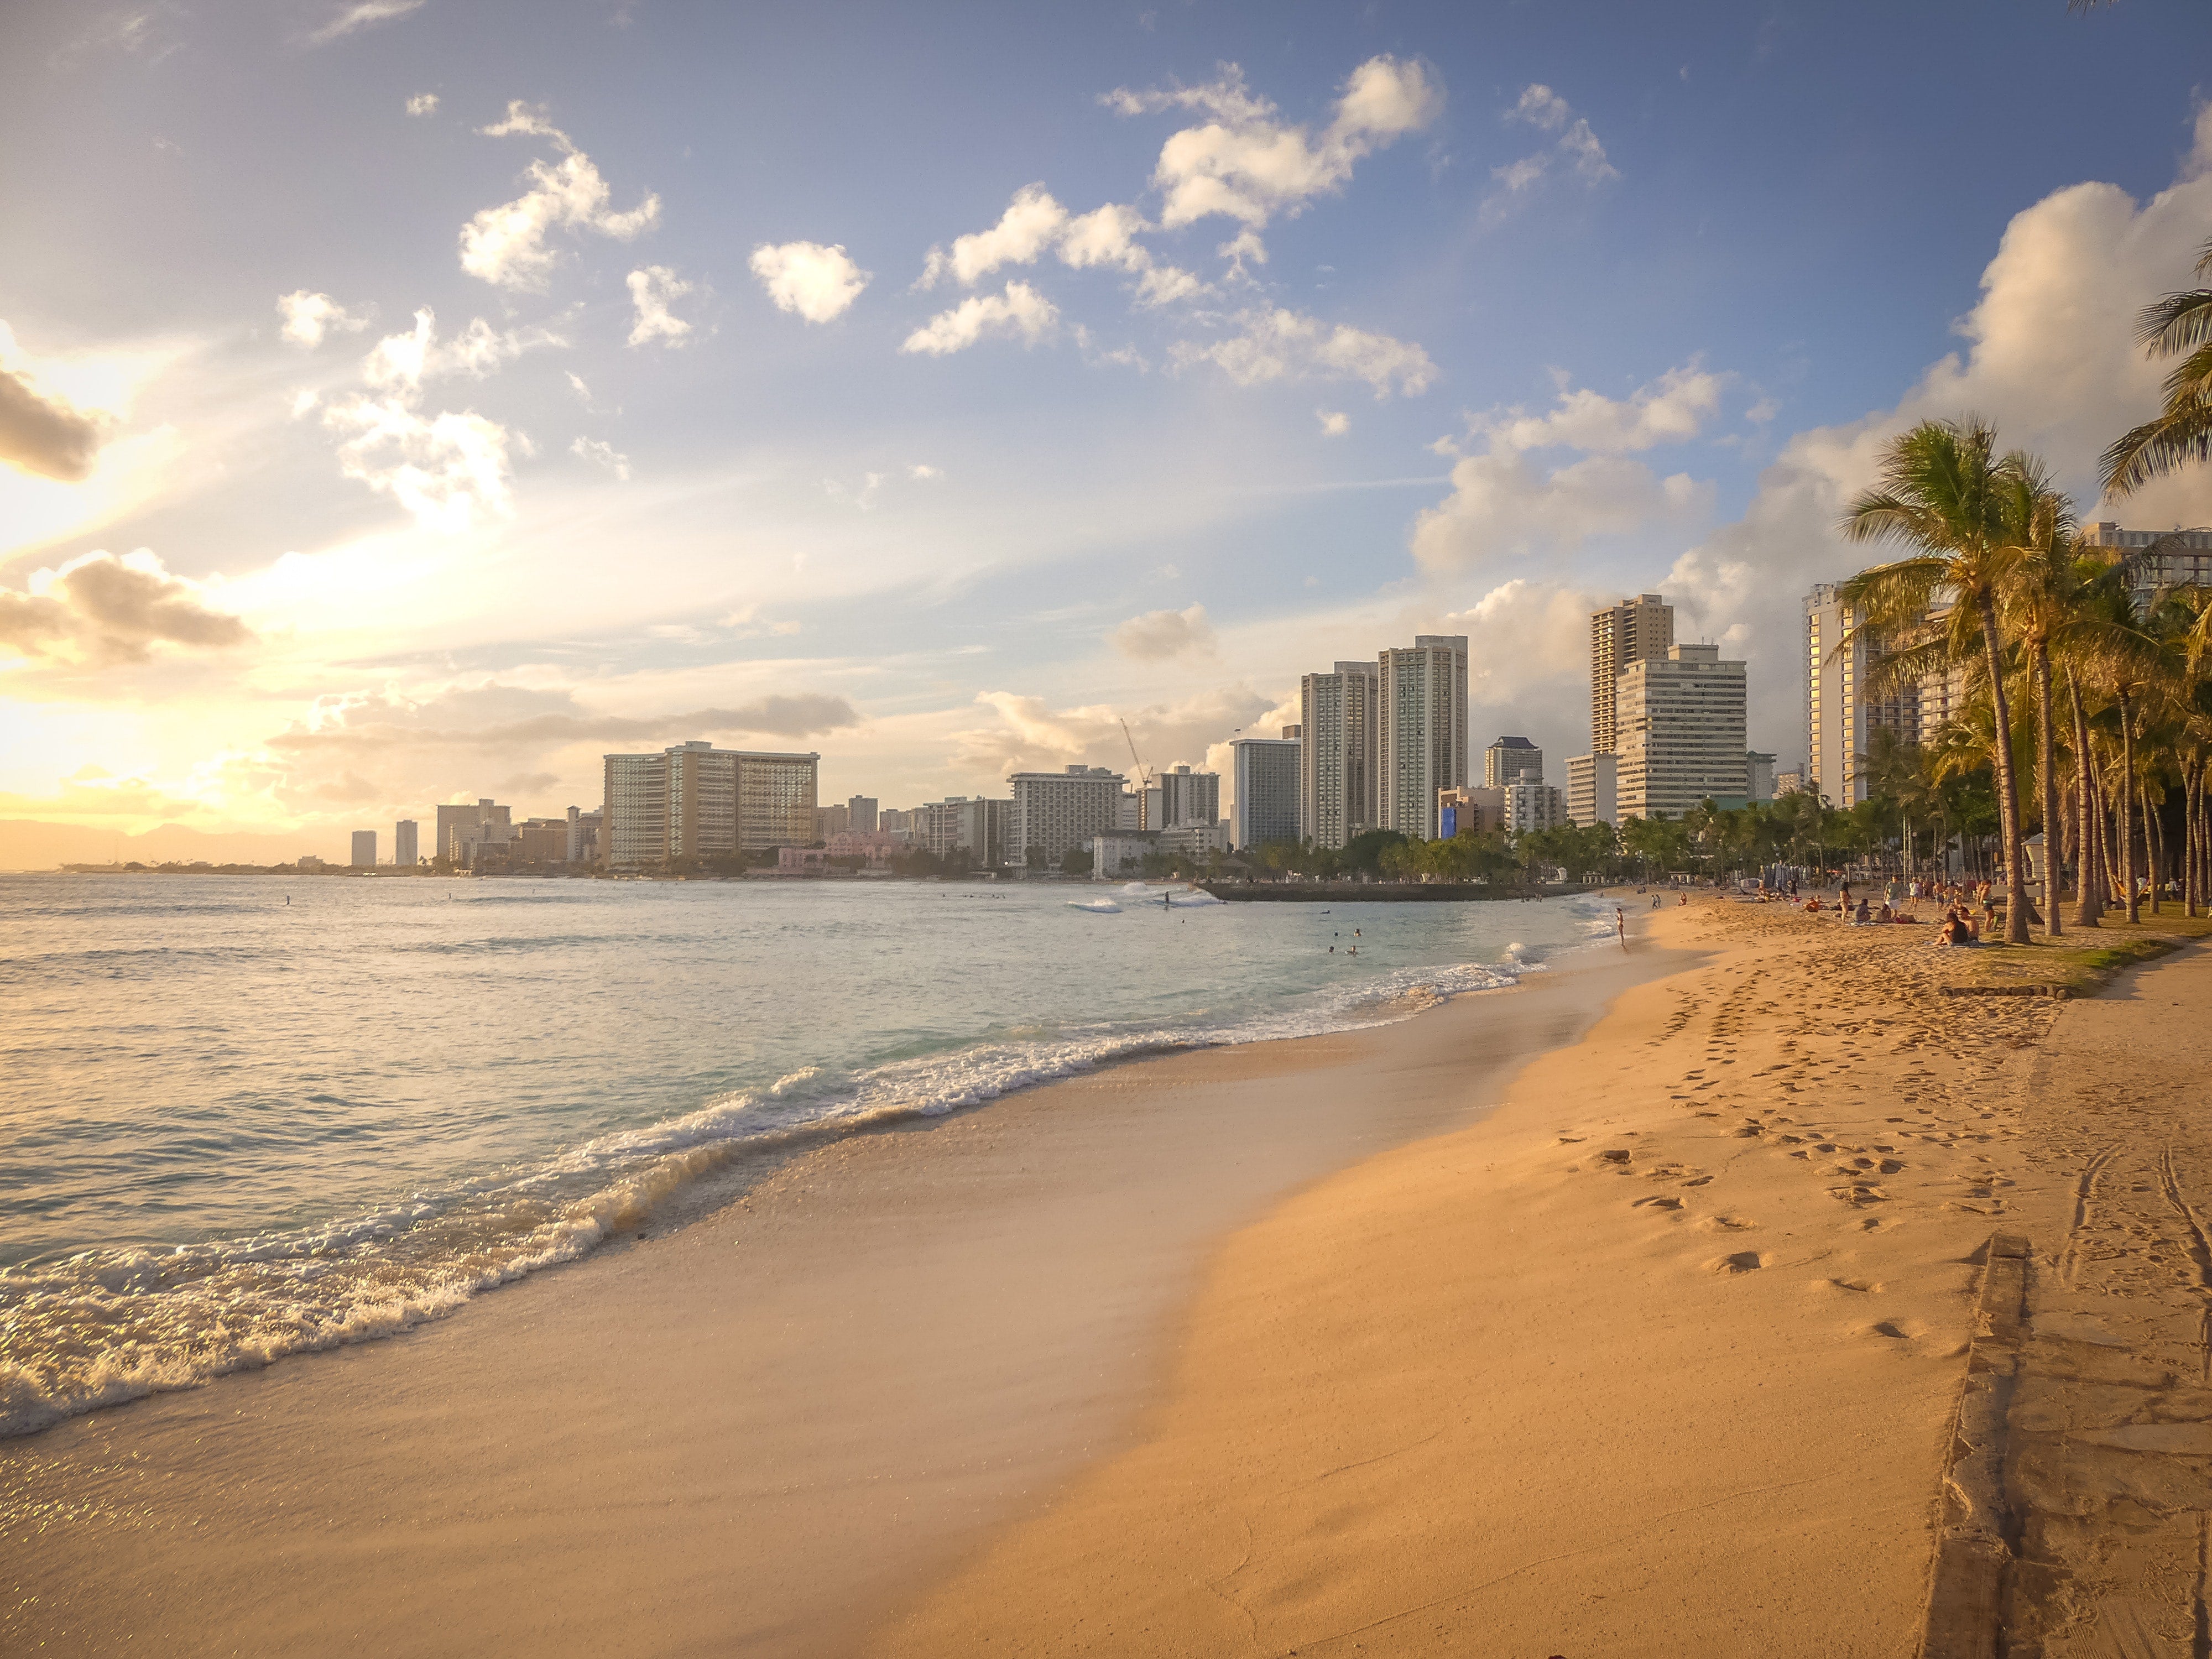 Excited to travel to Hawaii? Here's what you need to know